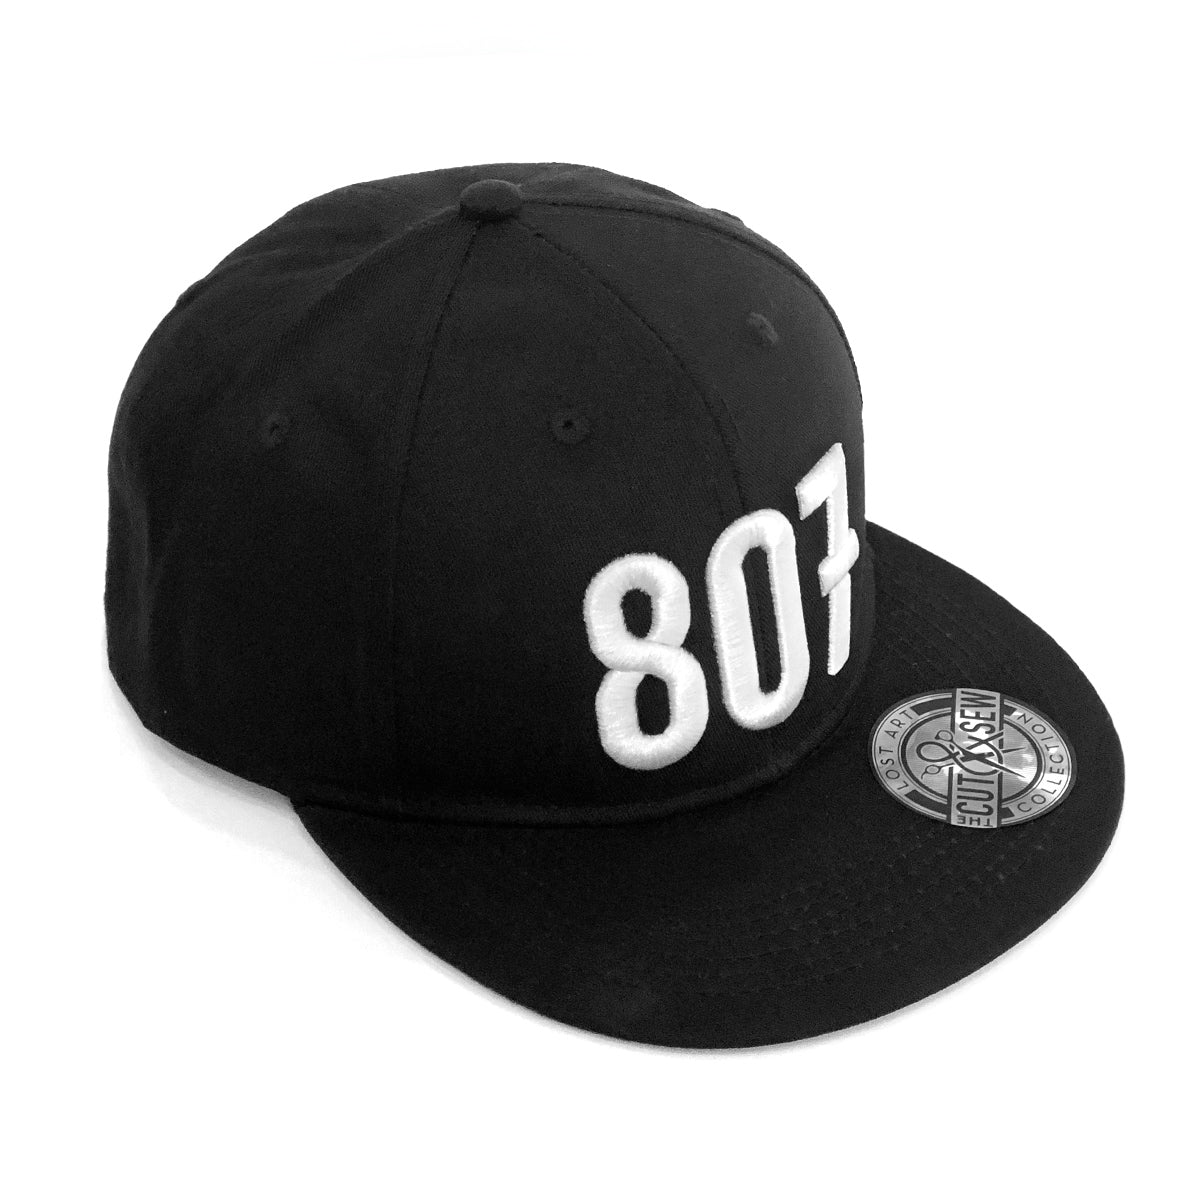 Lost Art Canada - white 807 black snapback hat front view